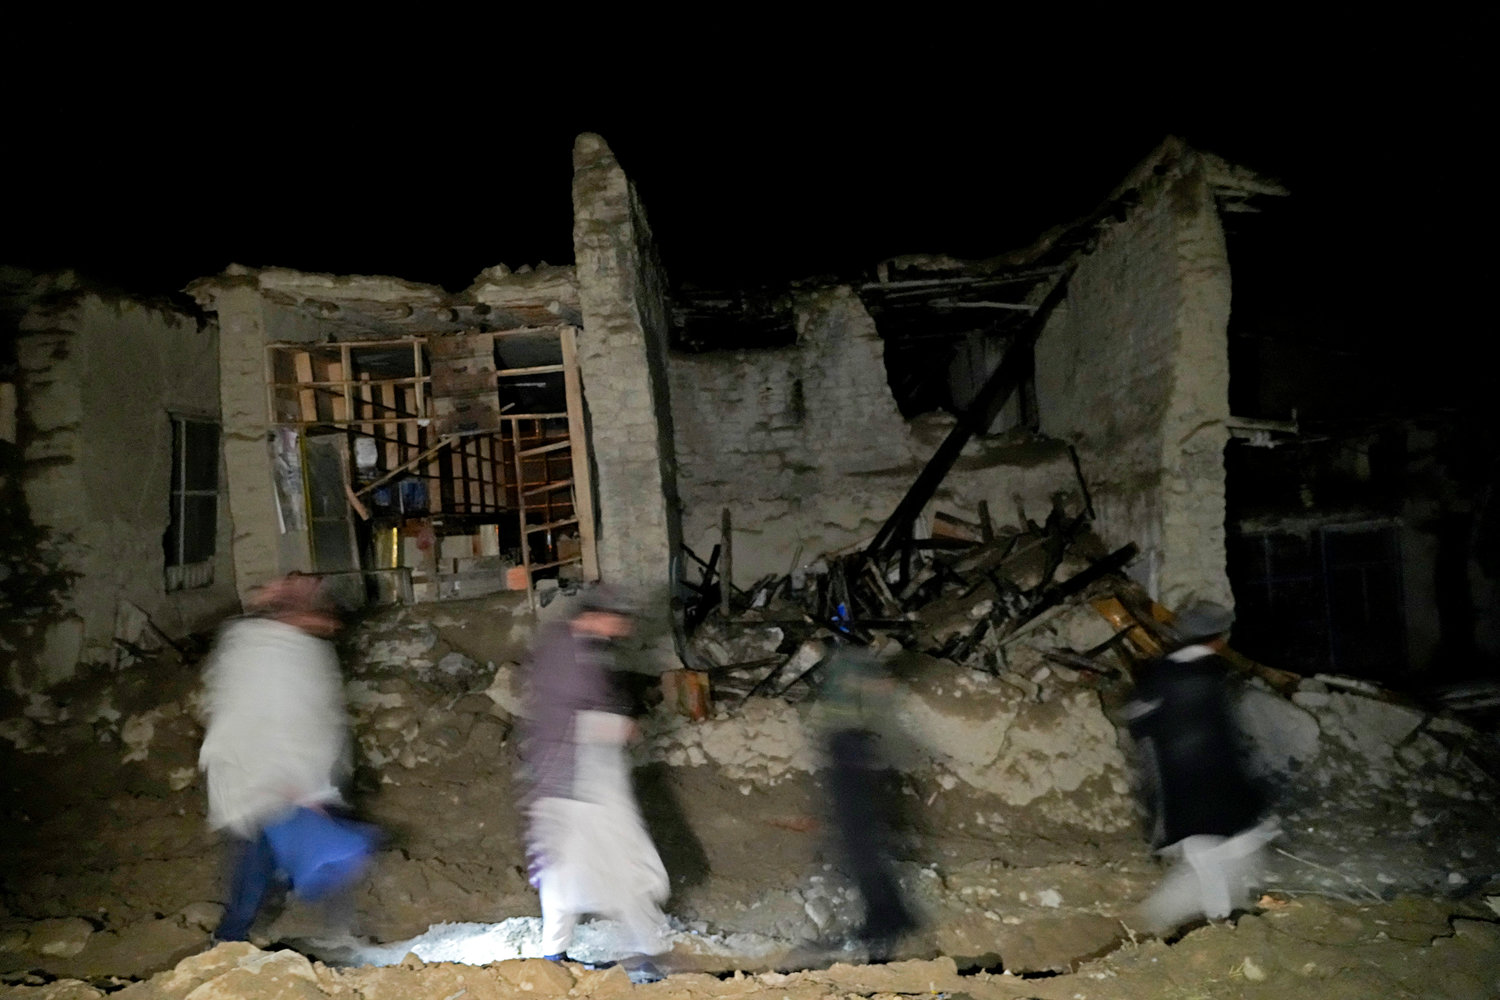 Afghans walk by a destroyed housein the village of Gyan, in Paktika province, Afghanistan, Wednesday, June 22, 2022. A powerful earthquake struck a rugged, mountainous region of eastern Afghanistan early Wednesday, flattening stone and mud-brick homes in the country's deadliest quake in two decades, the state-run news agency reported. (AP Photo/Ebrahim Nooroozi)